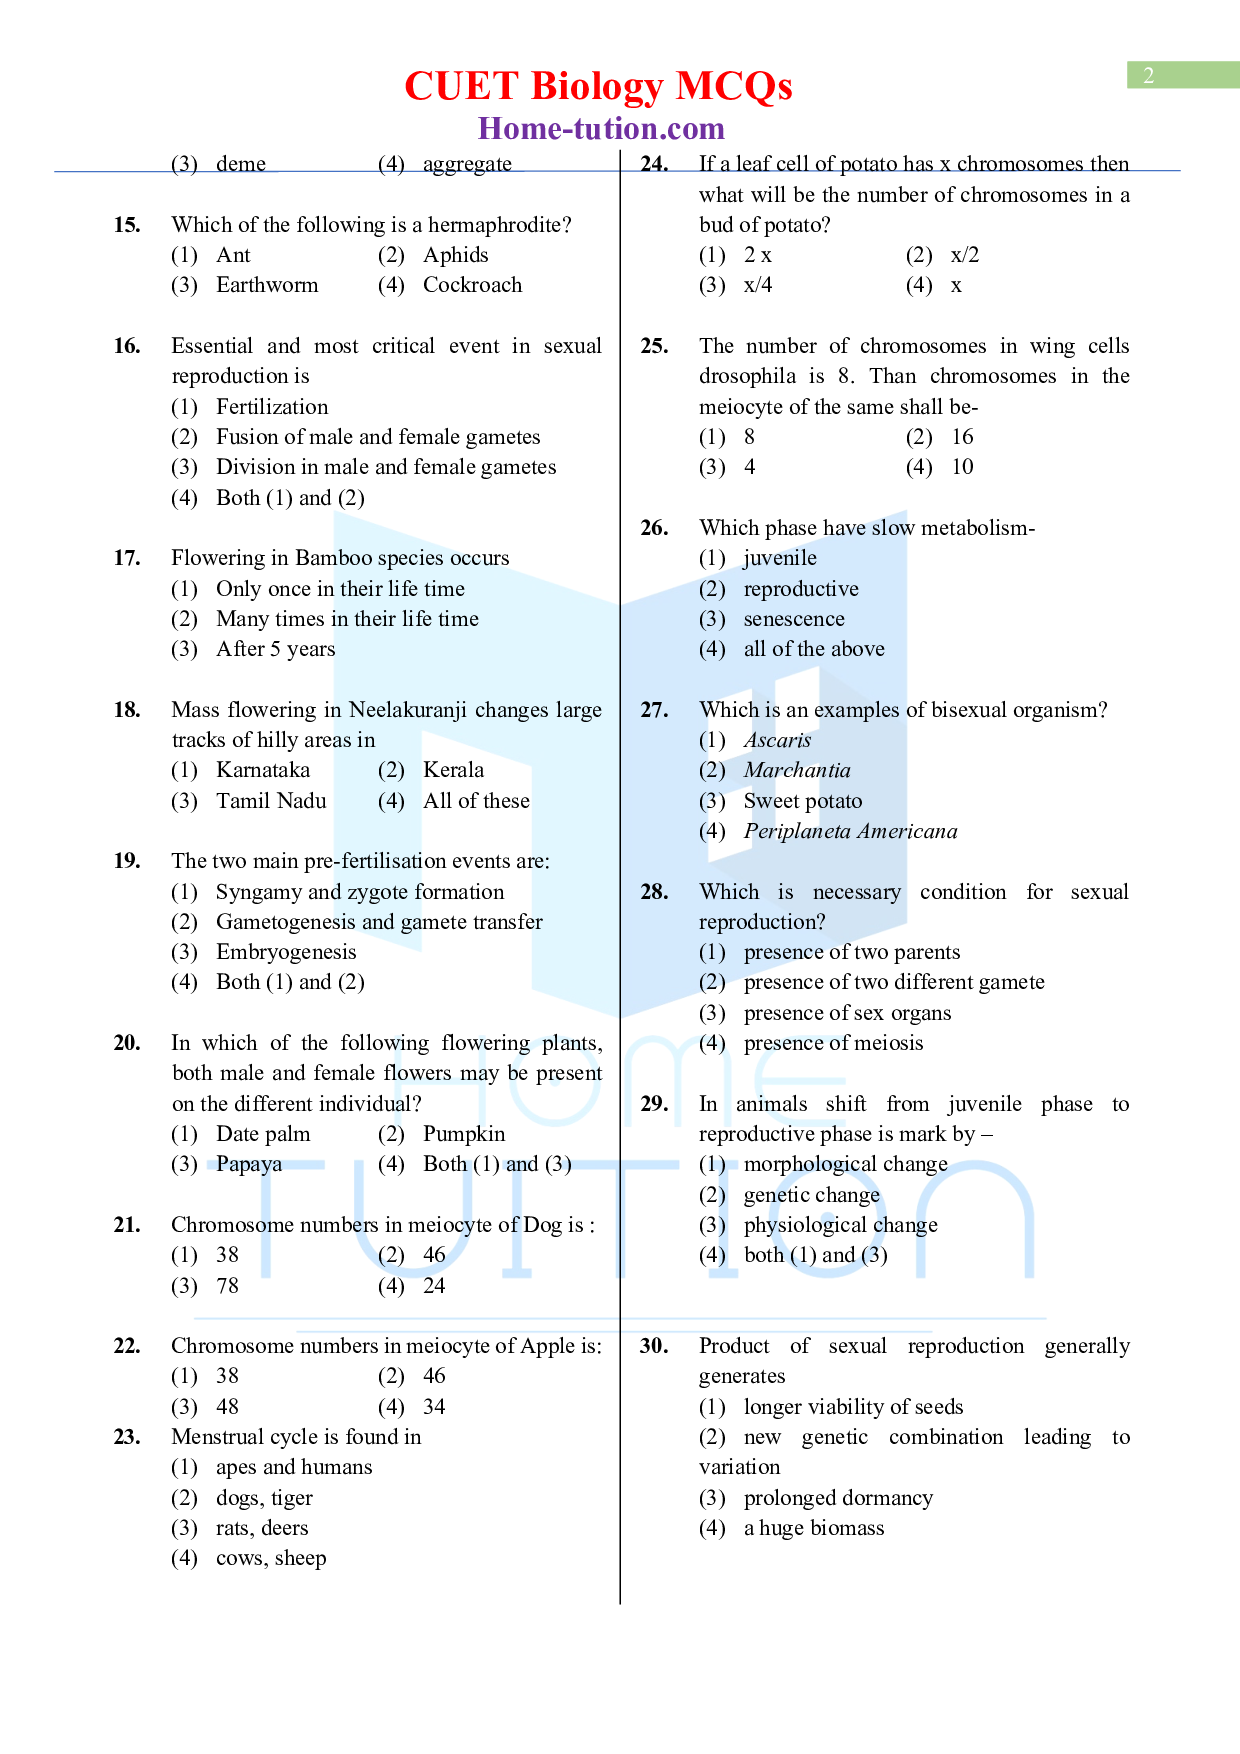 Biology MCQ Questions for CUET Chapter 1 Reproduction in Organisms